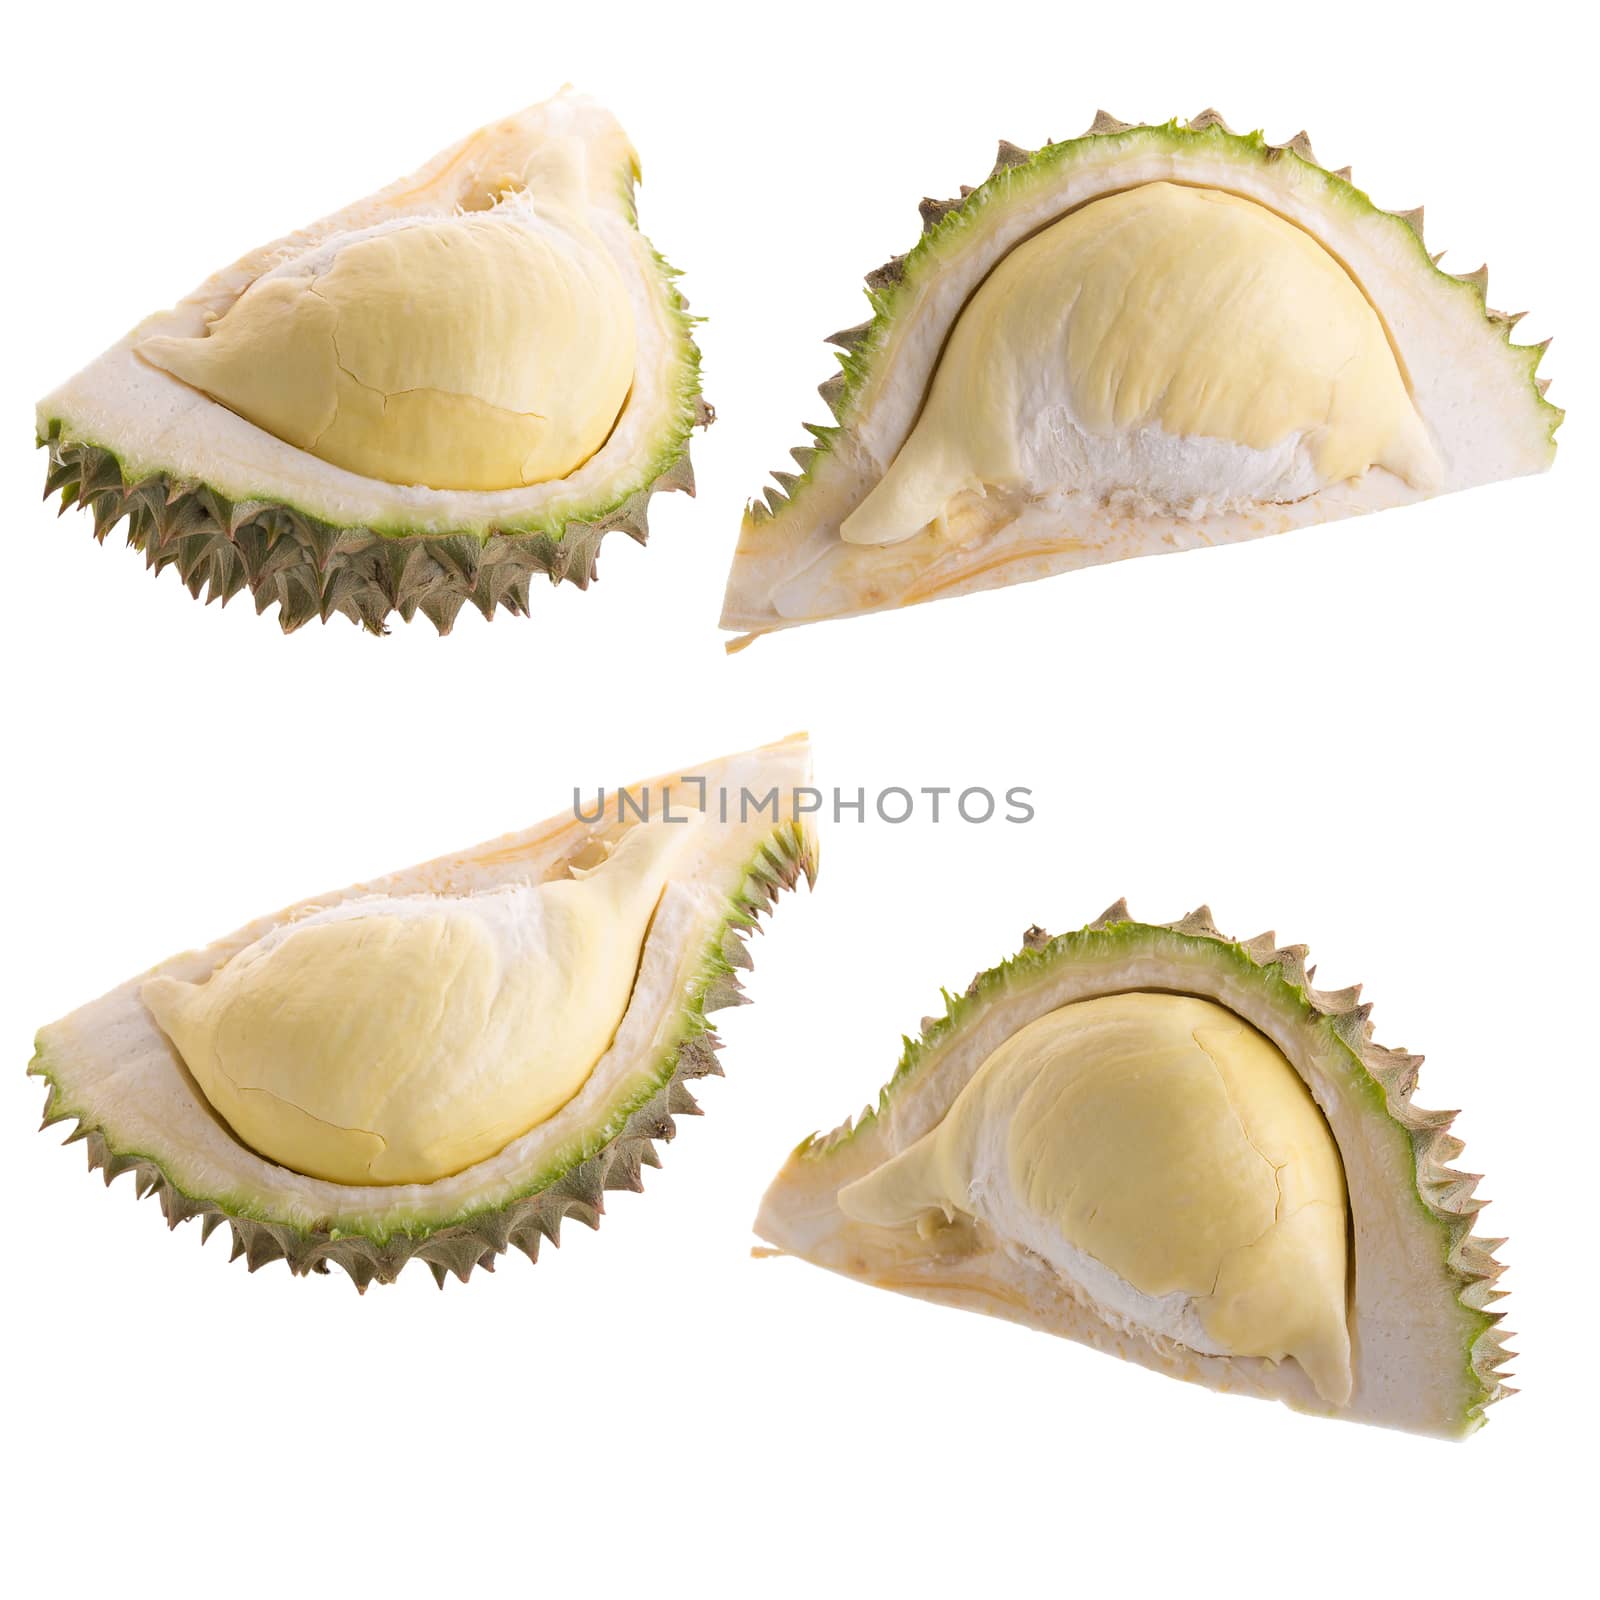 Fresh Cut Durian on a white background.